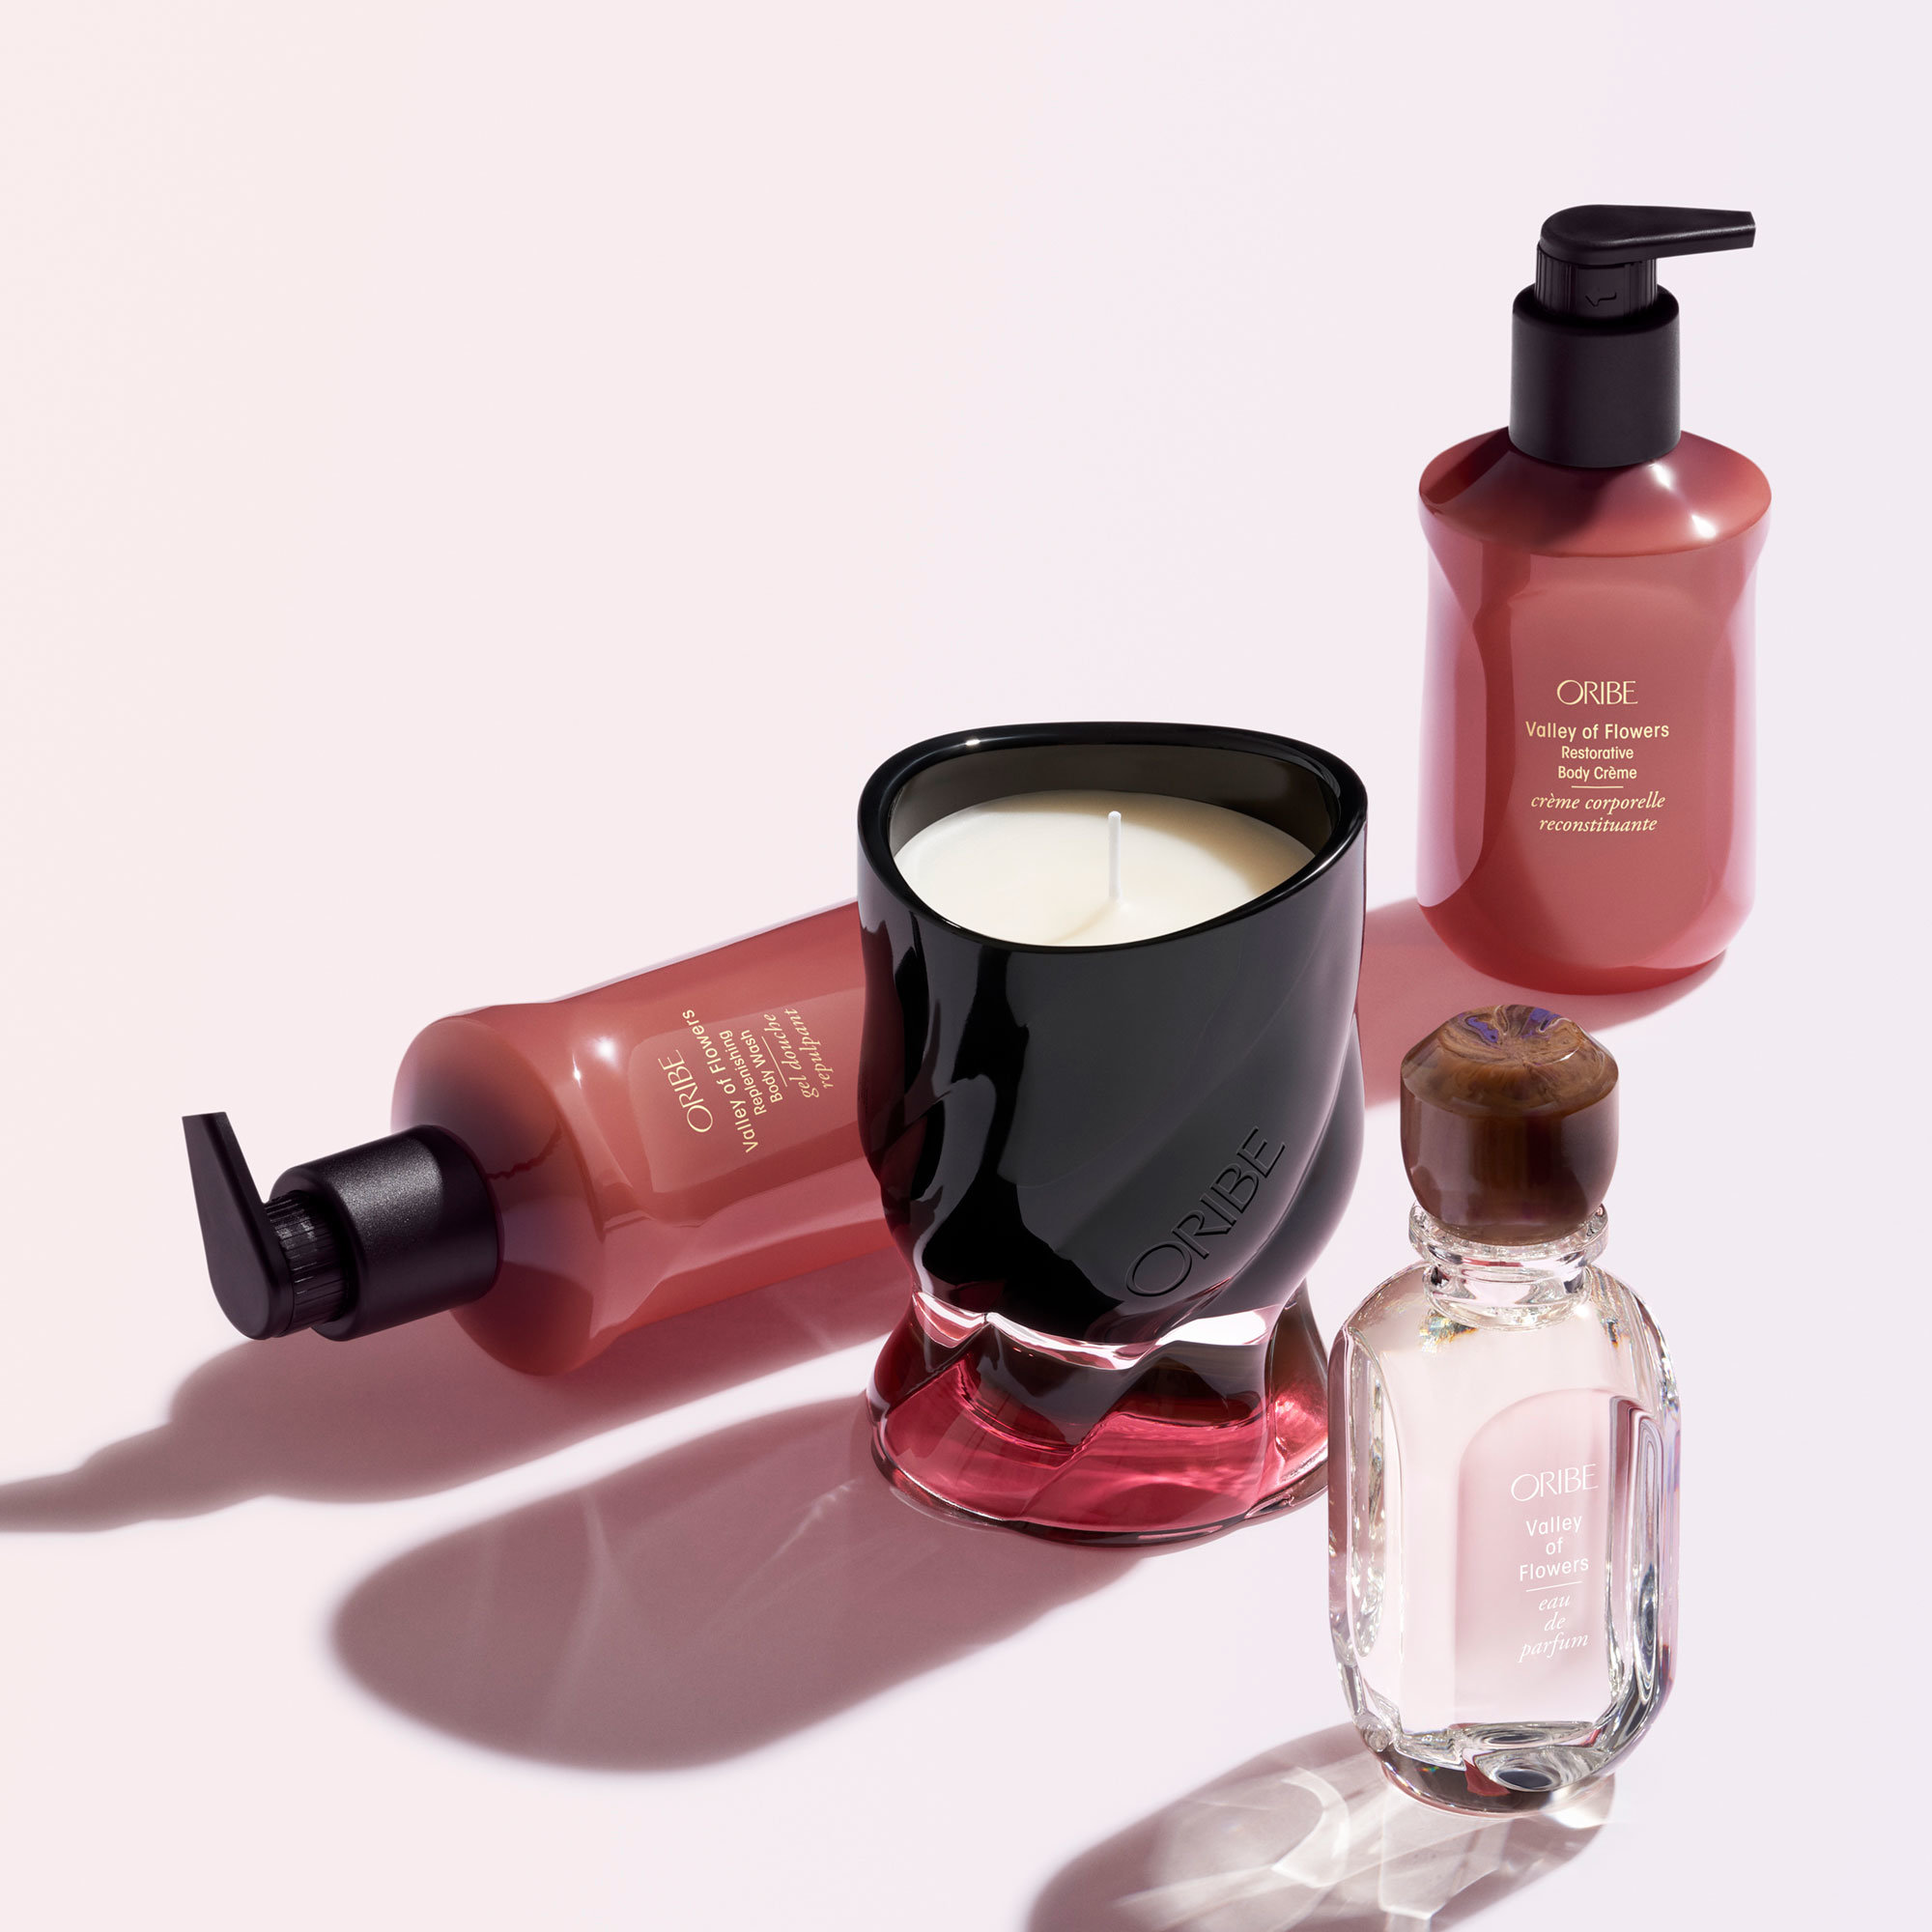 Oribe's Bodycare + Candle Collection